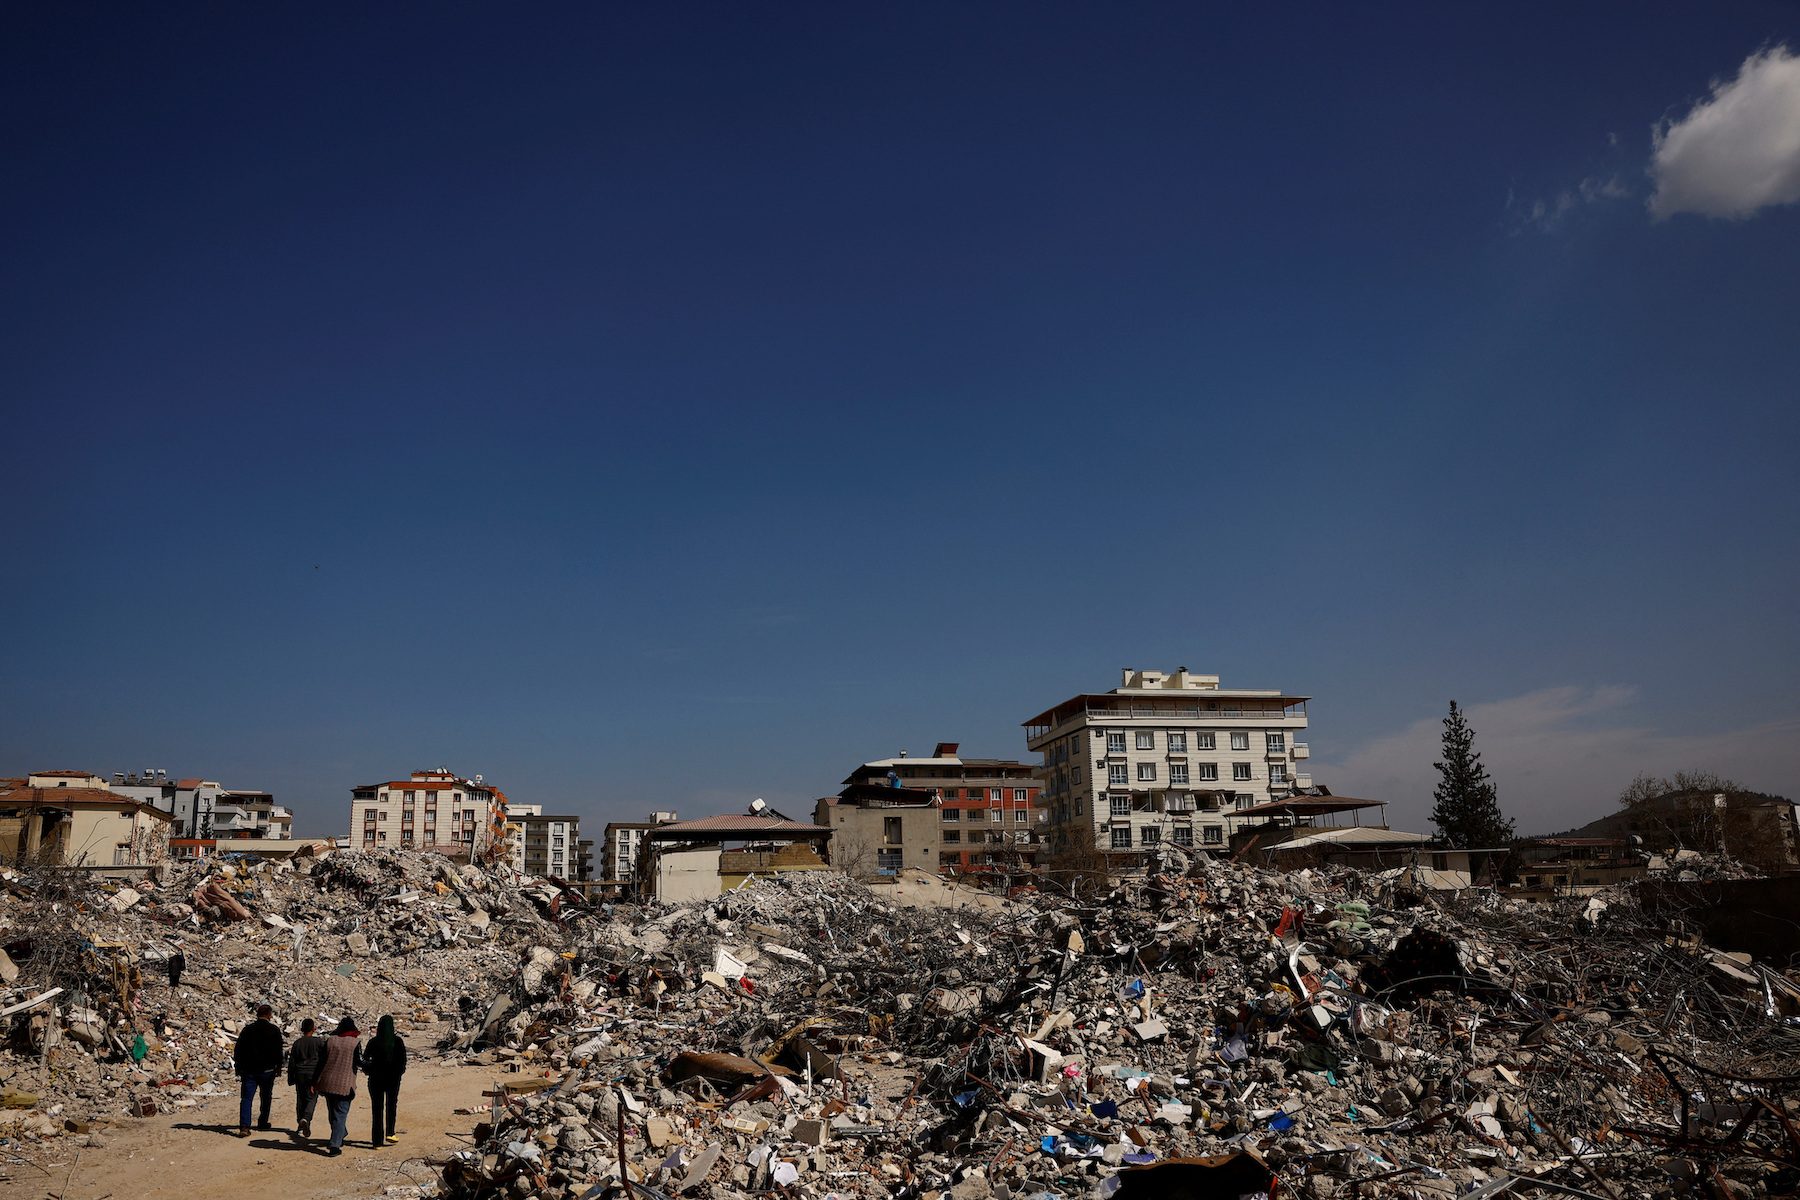 Turks ask how a boom town came crashing down in quake